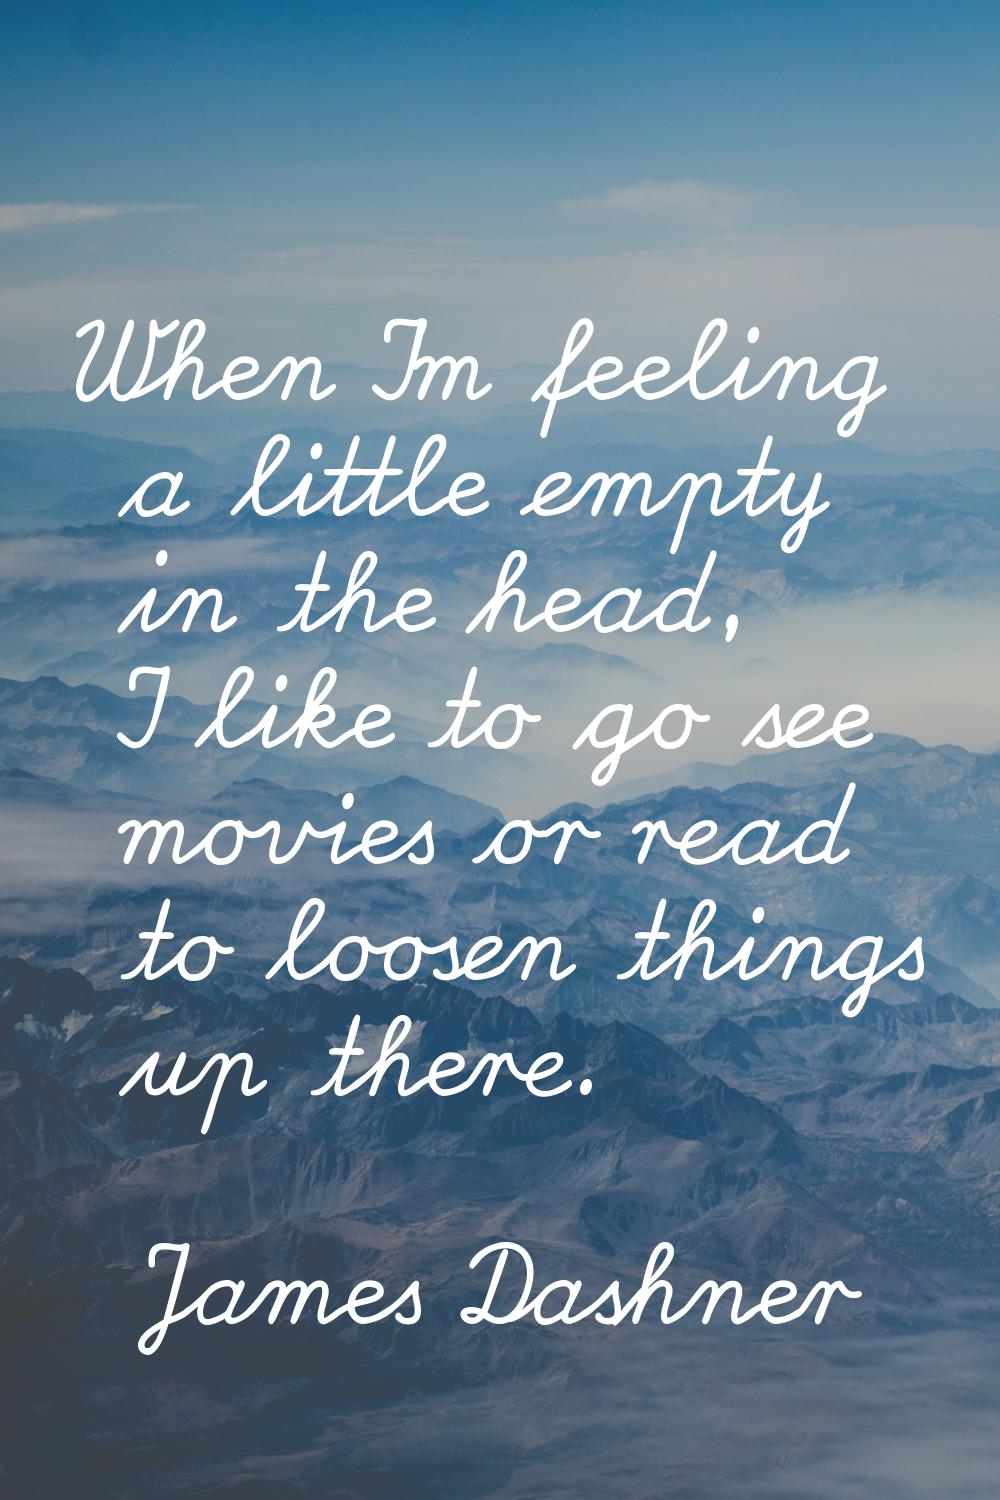 When I'm feeling a little empty in the head, I like to go see movies or read to loosen things up th